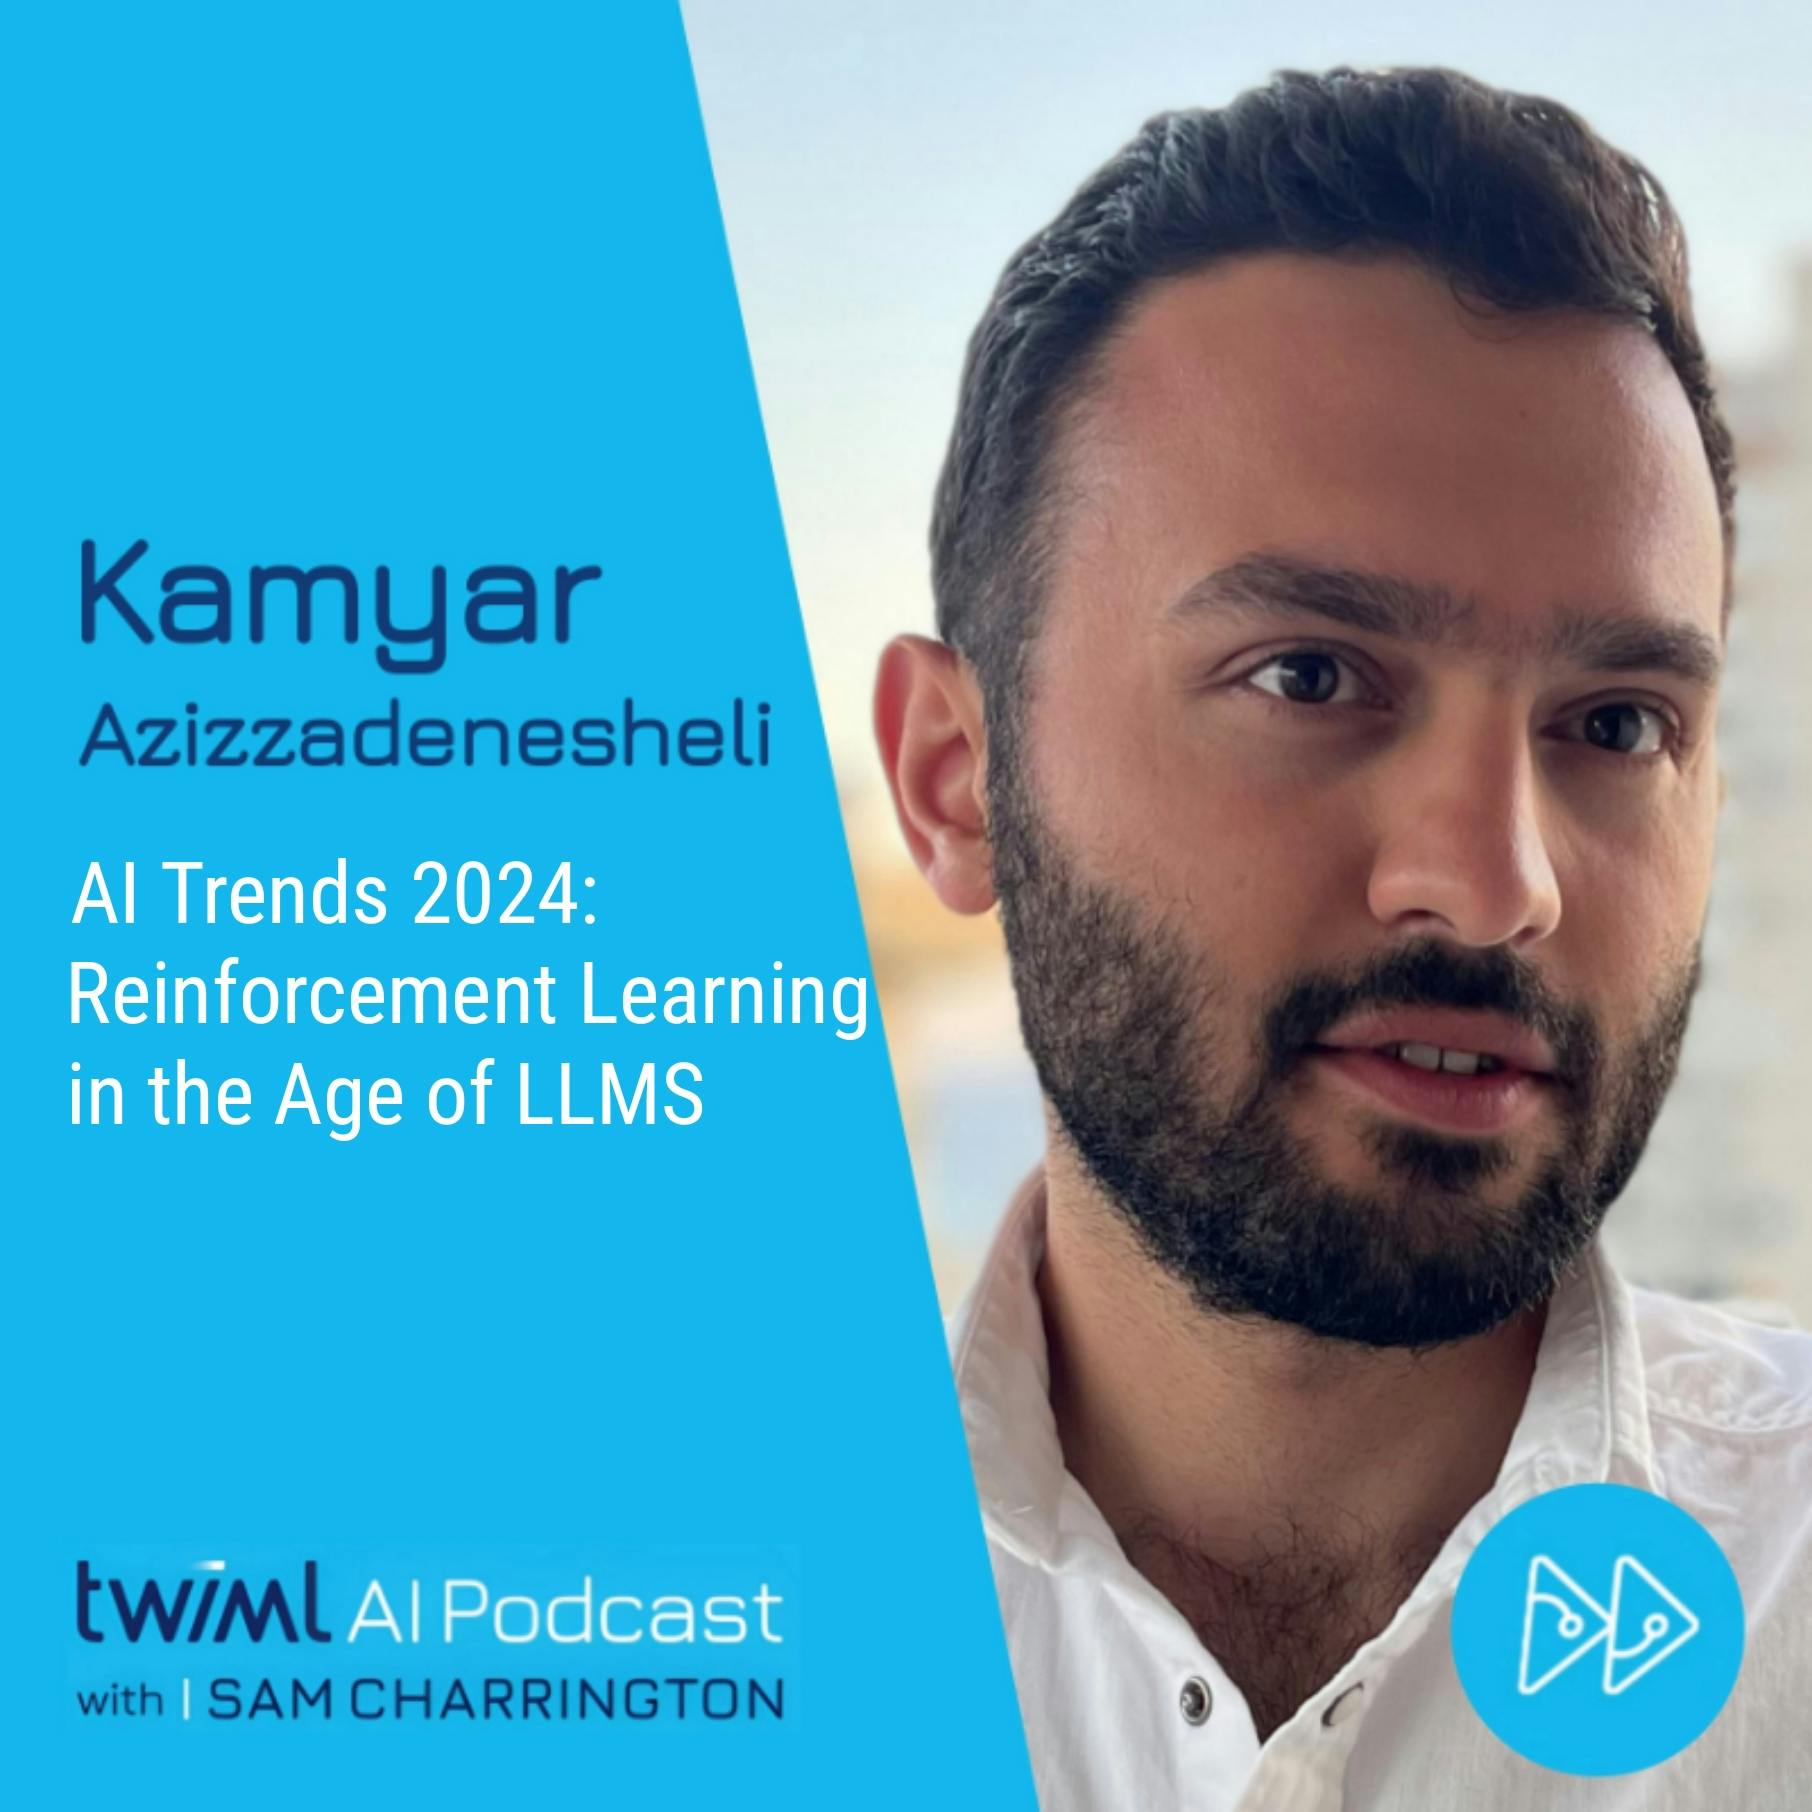 AI Trends 2024: Reinforcement Learning in the Age of LLMs with Kamyar Azizzadenesheli - #670